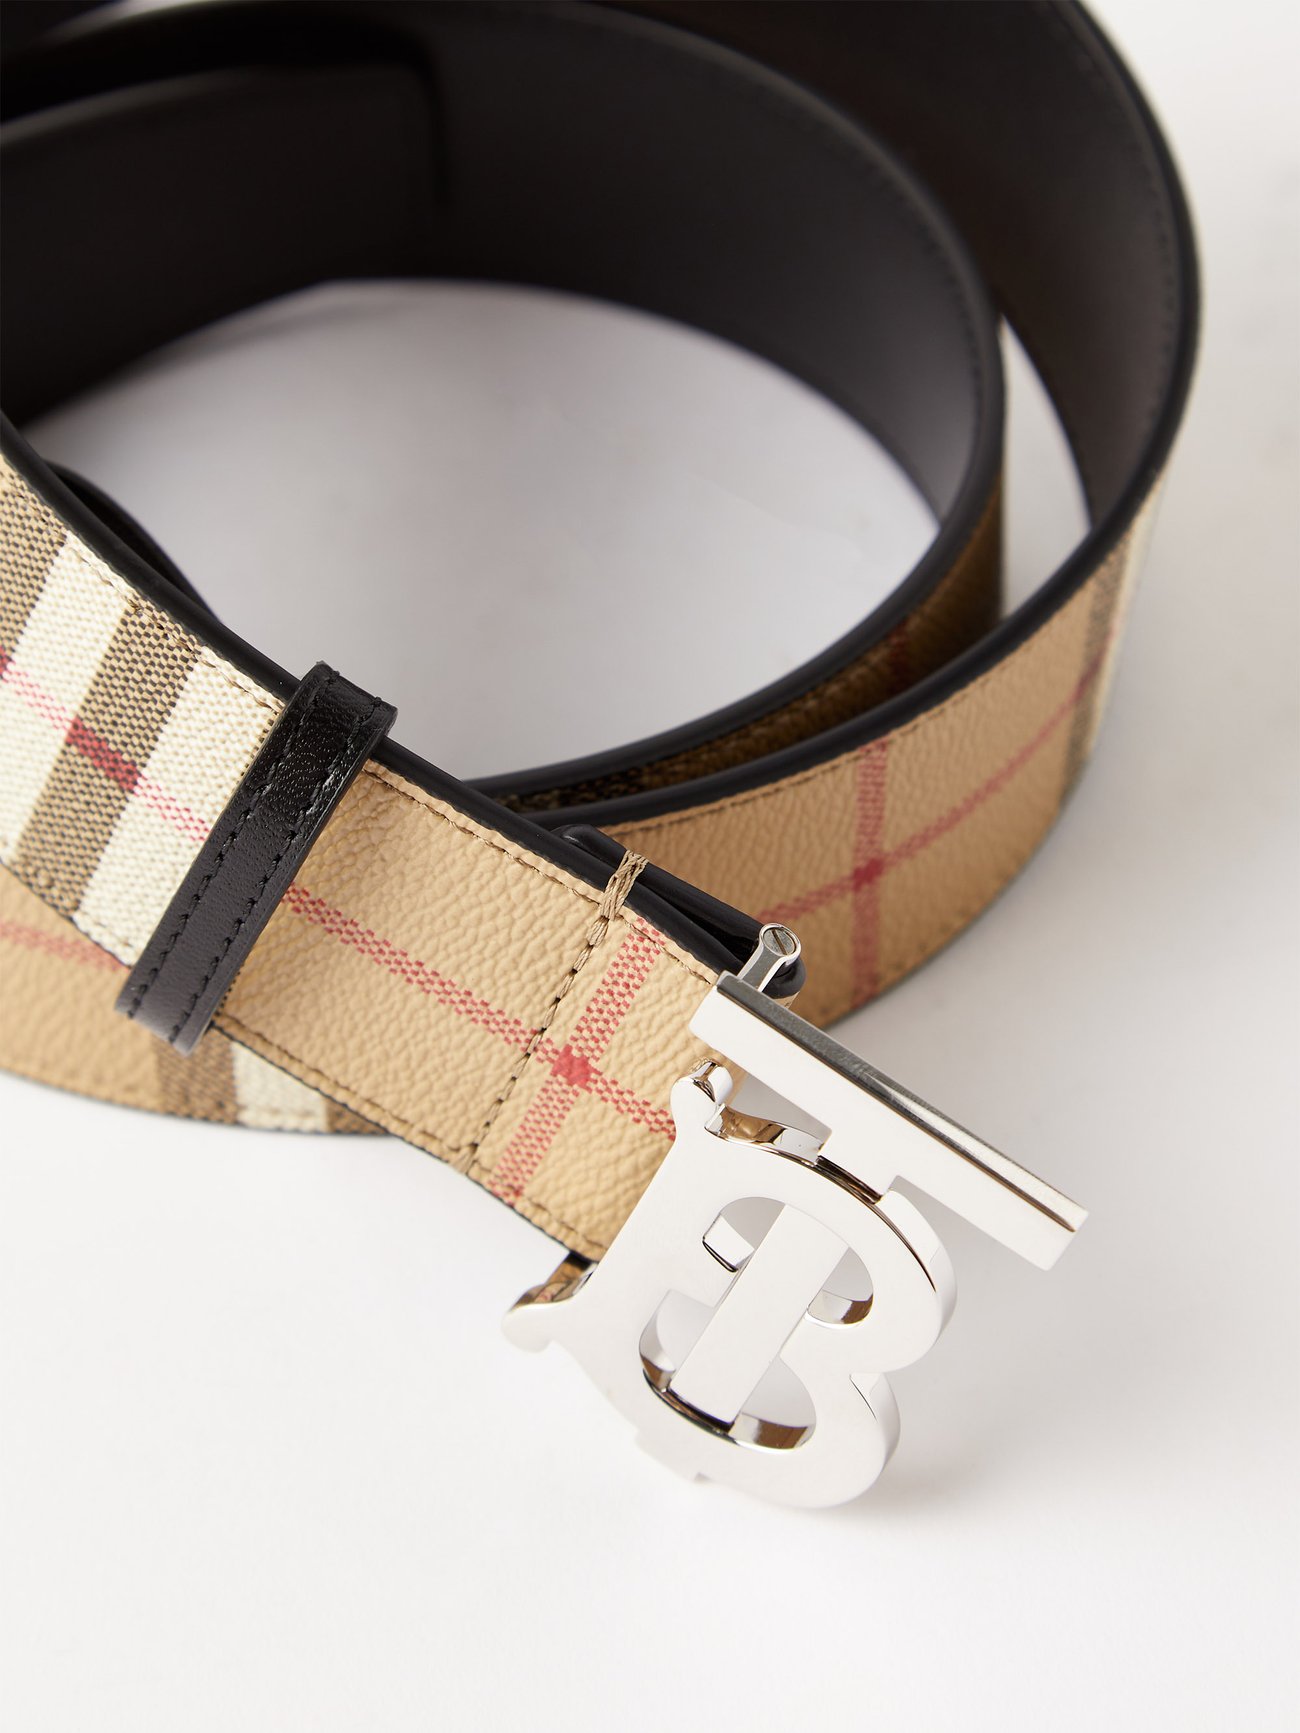 NEW!!! BURBERRY Black Calf Leather Embossed Check TB Monogram Belt Size  110•44 (US 36) Retail: $510